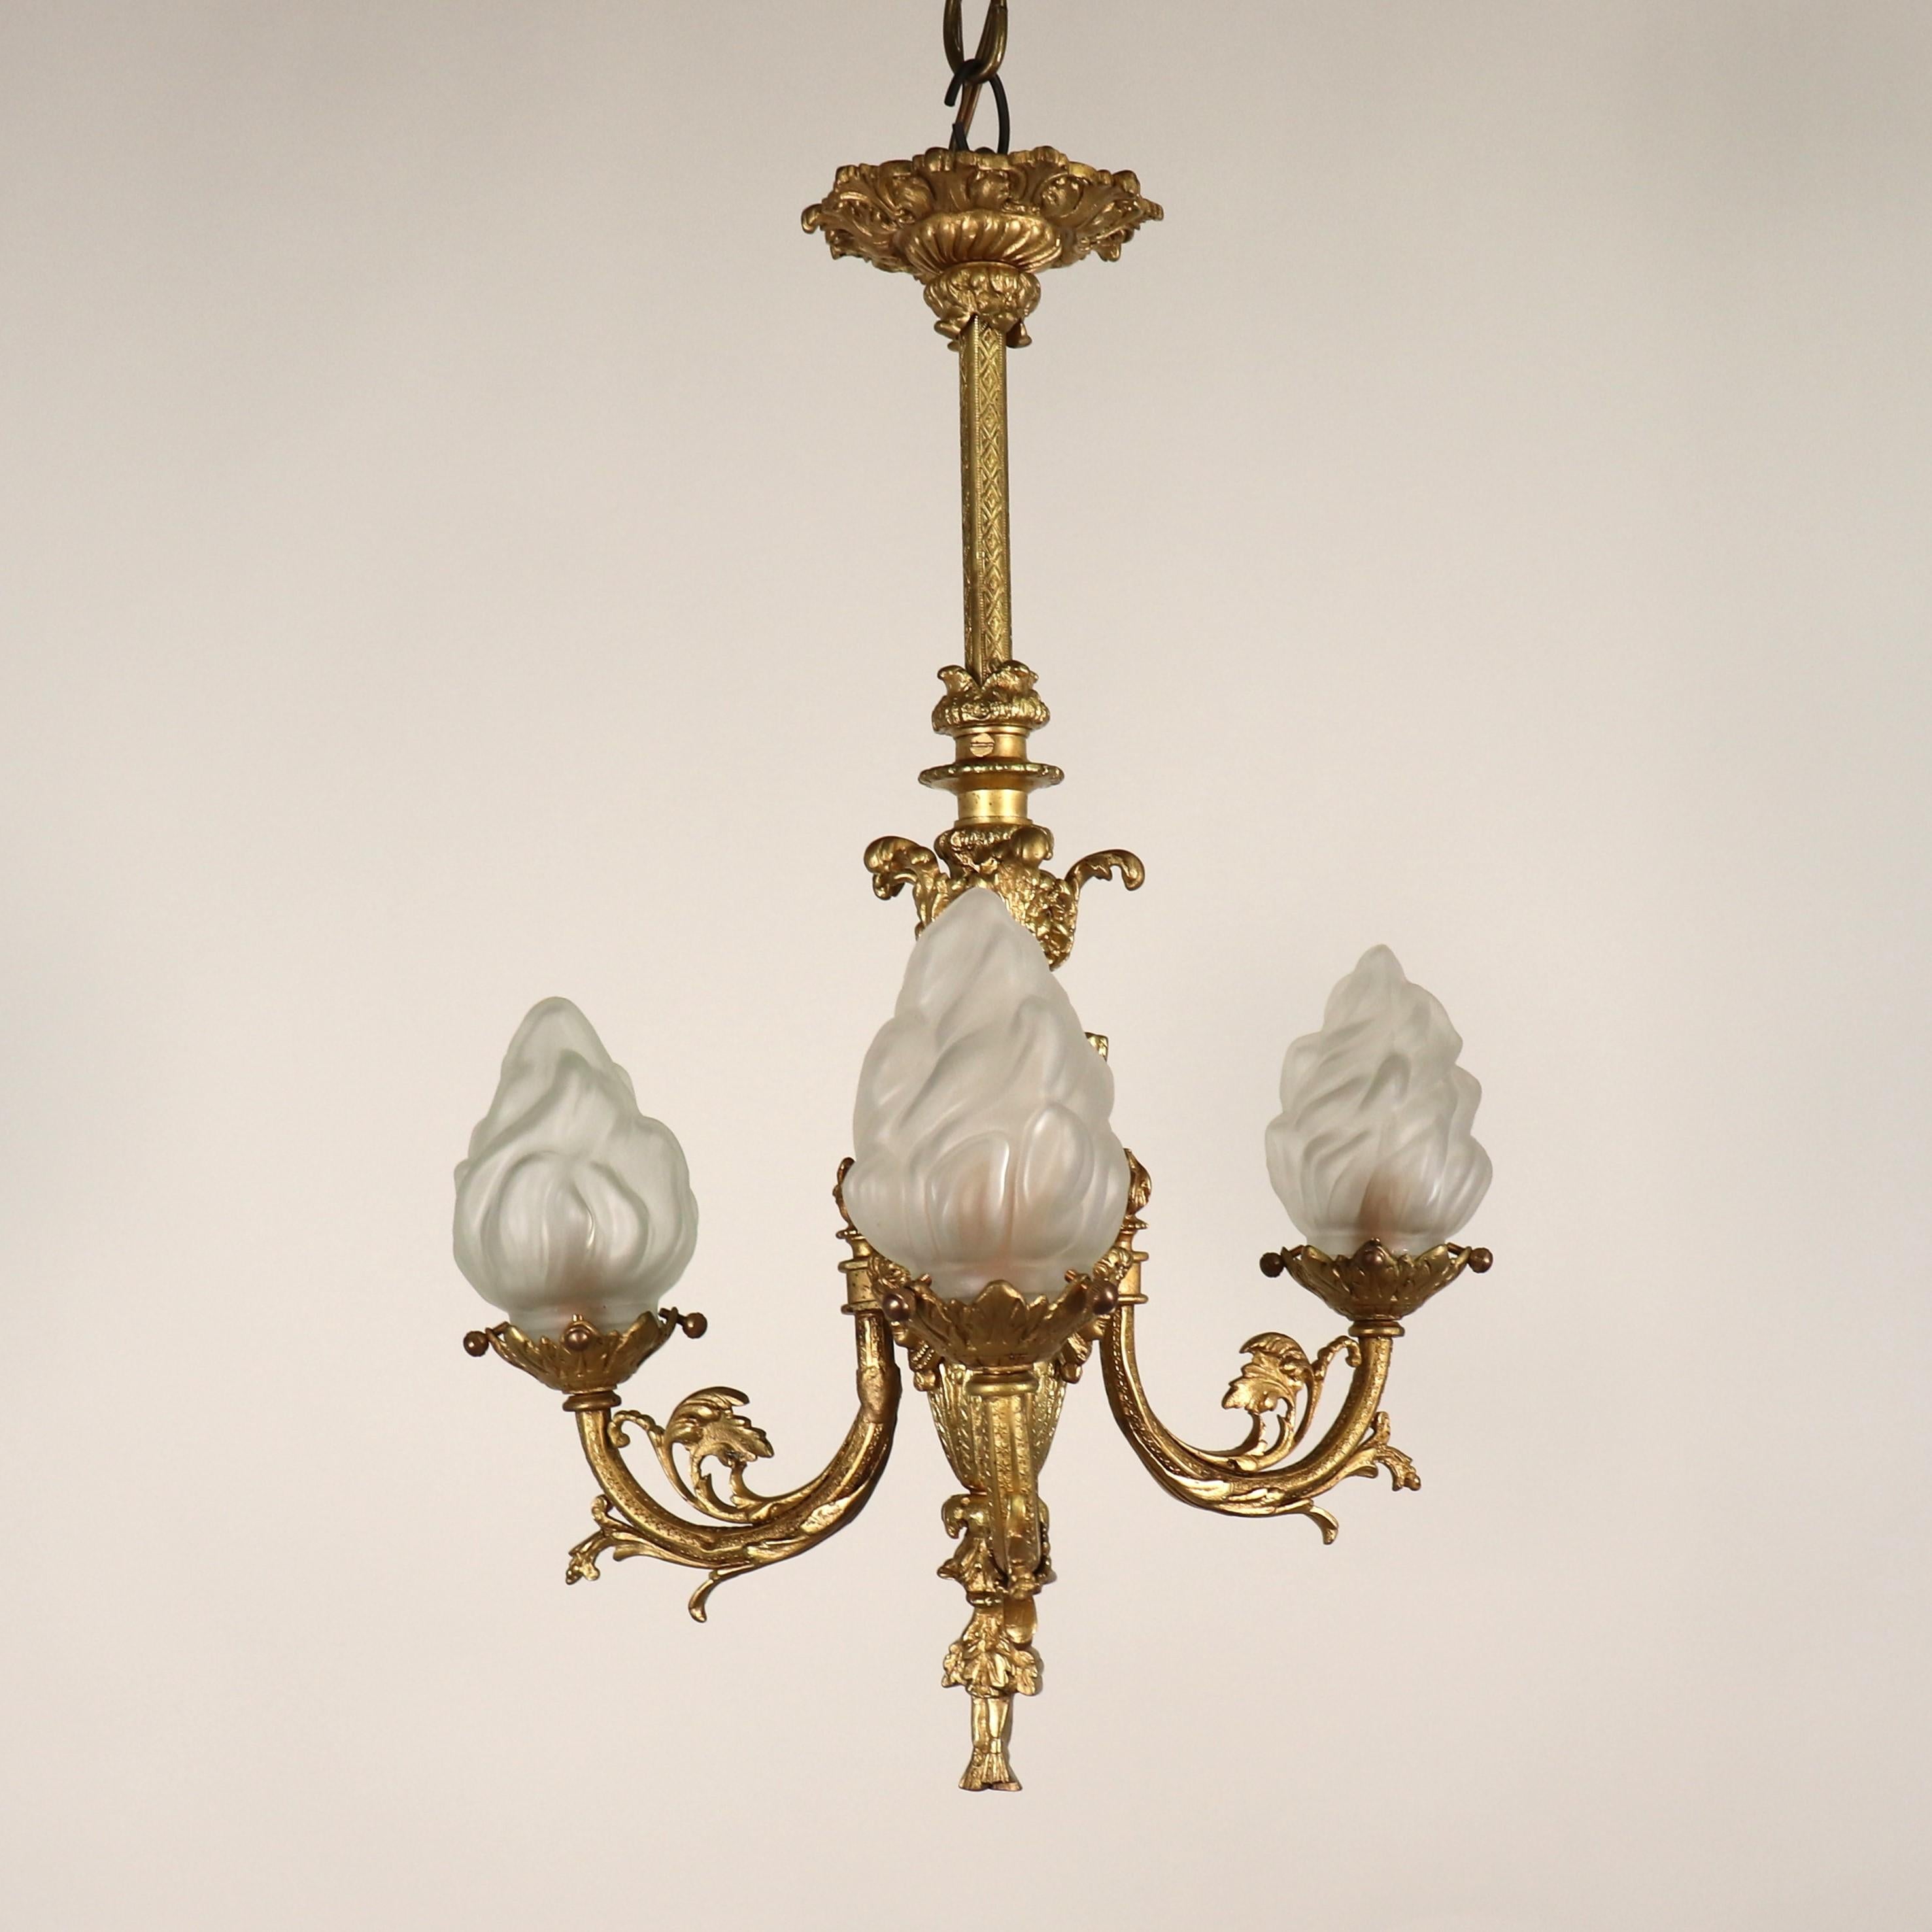 his exquisitely made, Circa 1880, French, Louis XVI style, yellow gold gilt chandelier is a masterpiece of metalwork full of neoclassical motifs that carry multi-layered symbolism that speaks to the aesthetic, intellectual, and cultural tapestry of